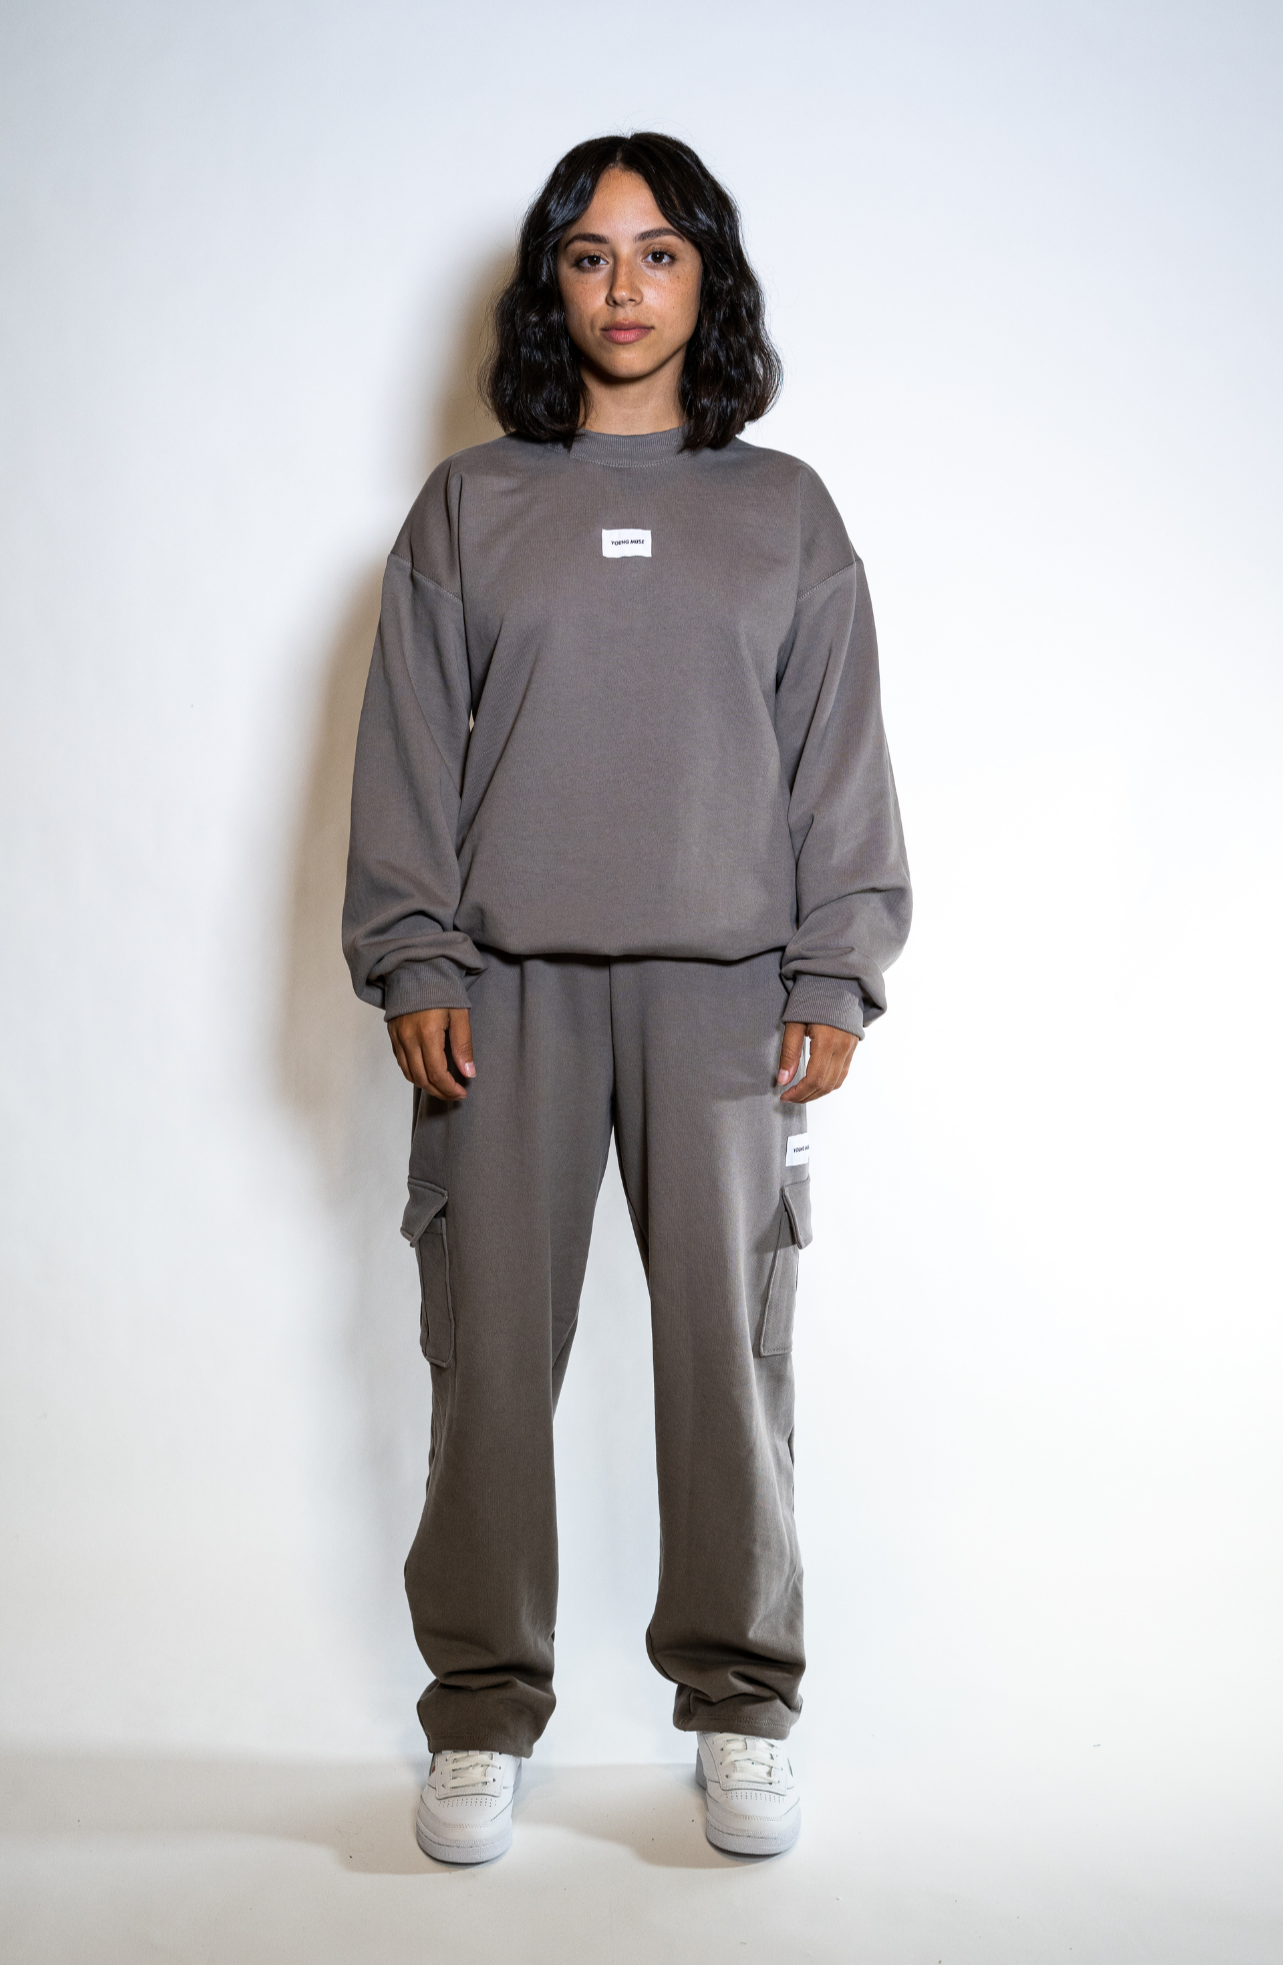 Foot Locker x Young Muse Behind Her Label Toronto Cargo Sweats